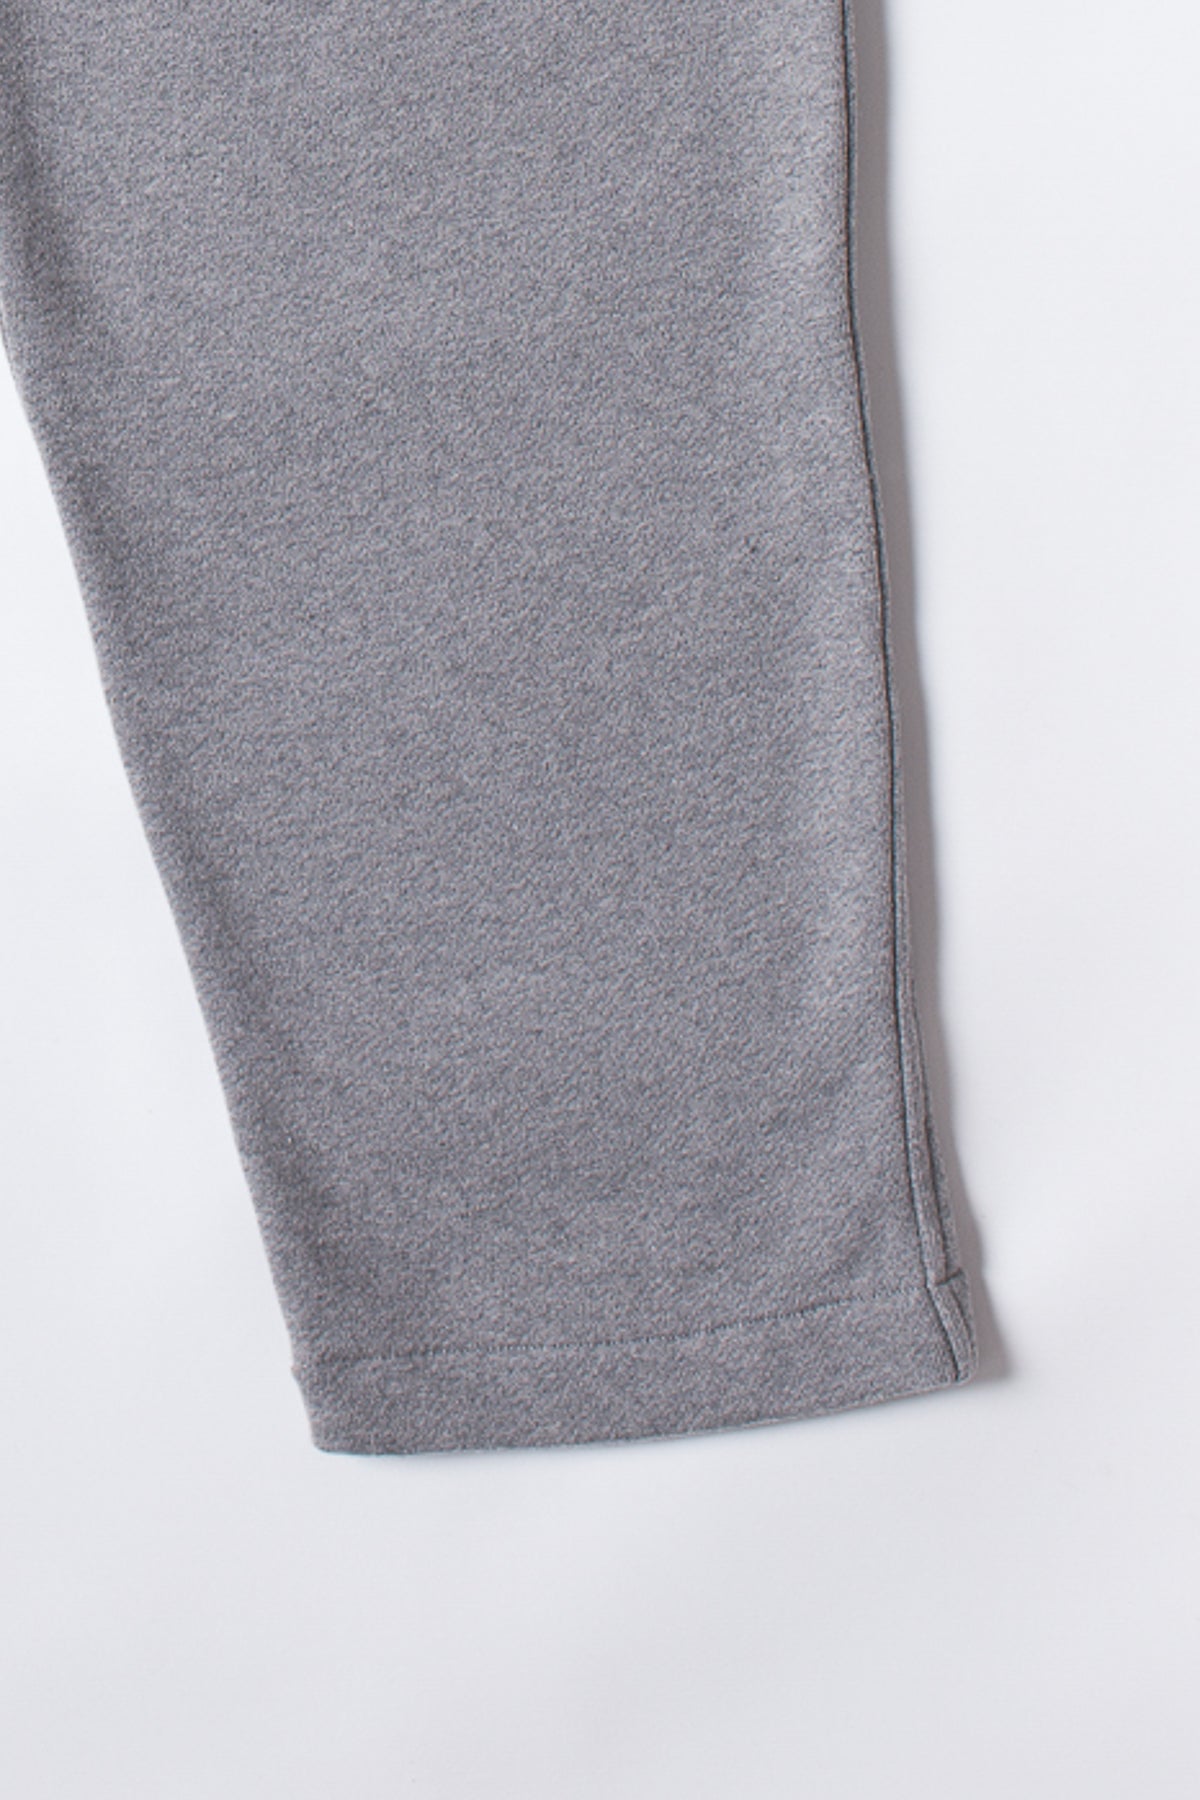 08 / Tracksuit Trousers Grey